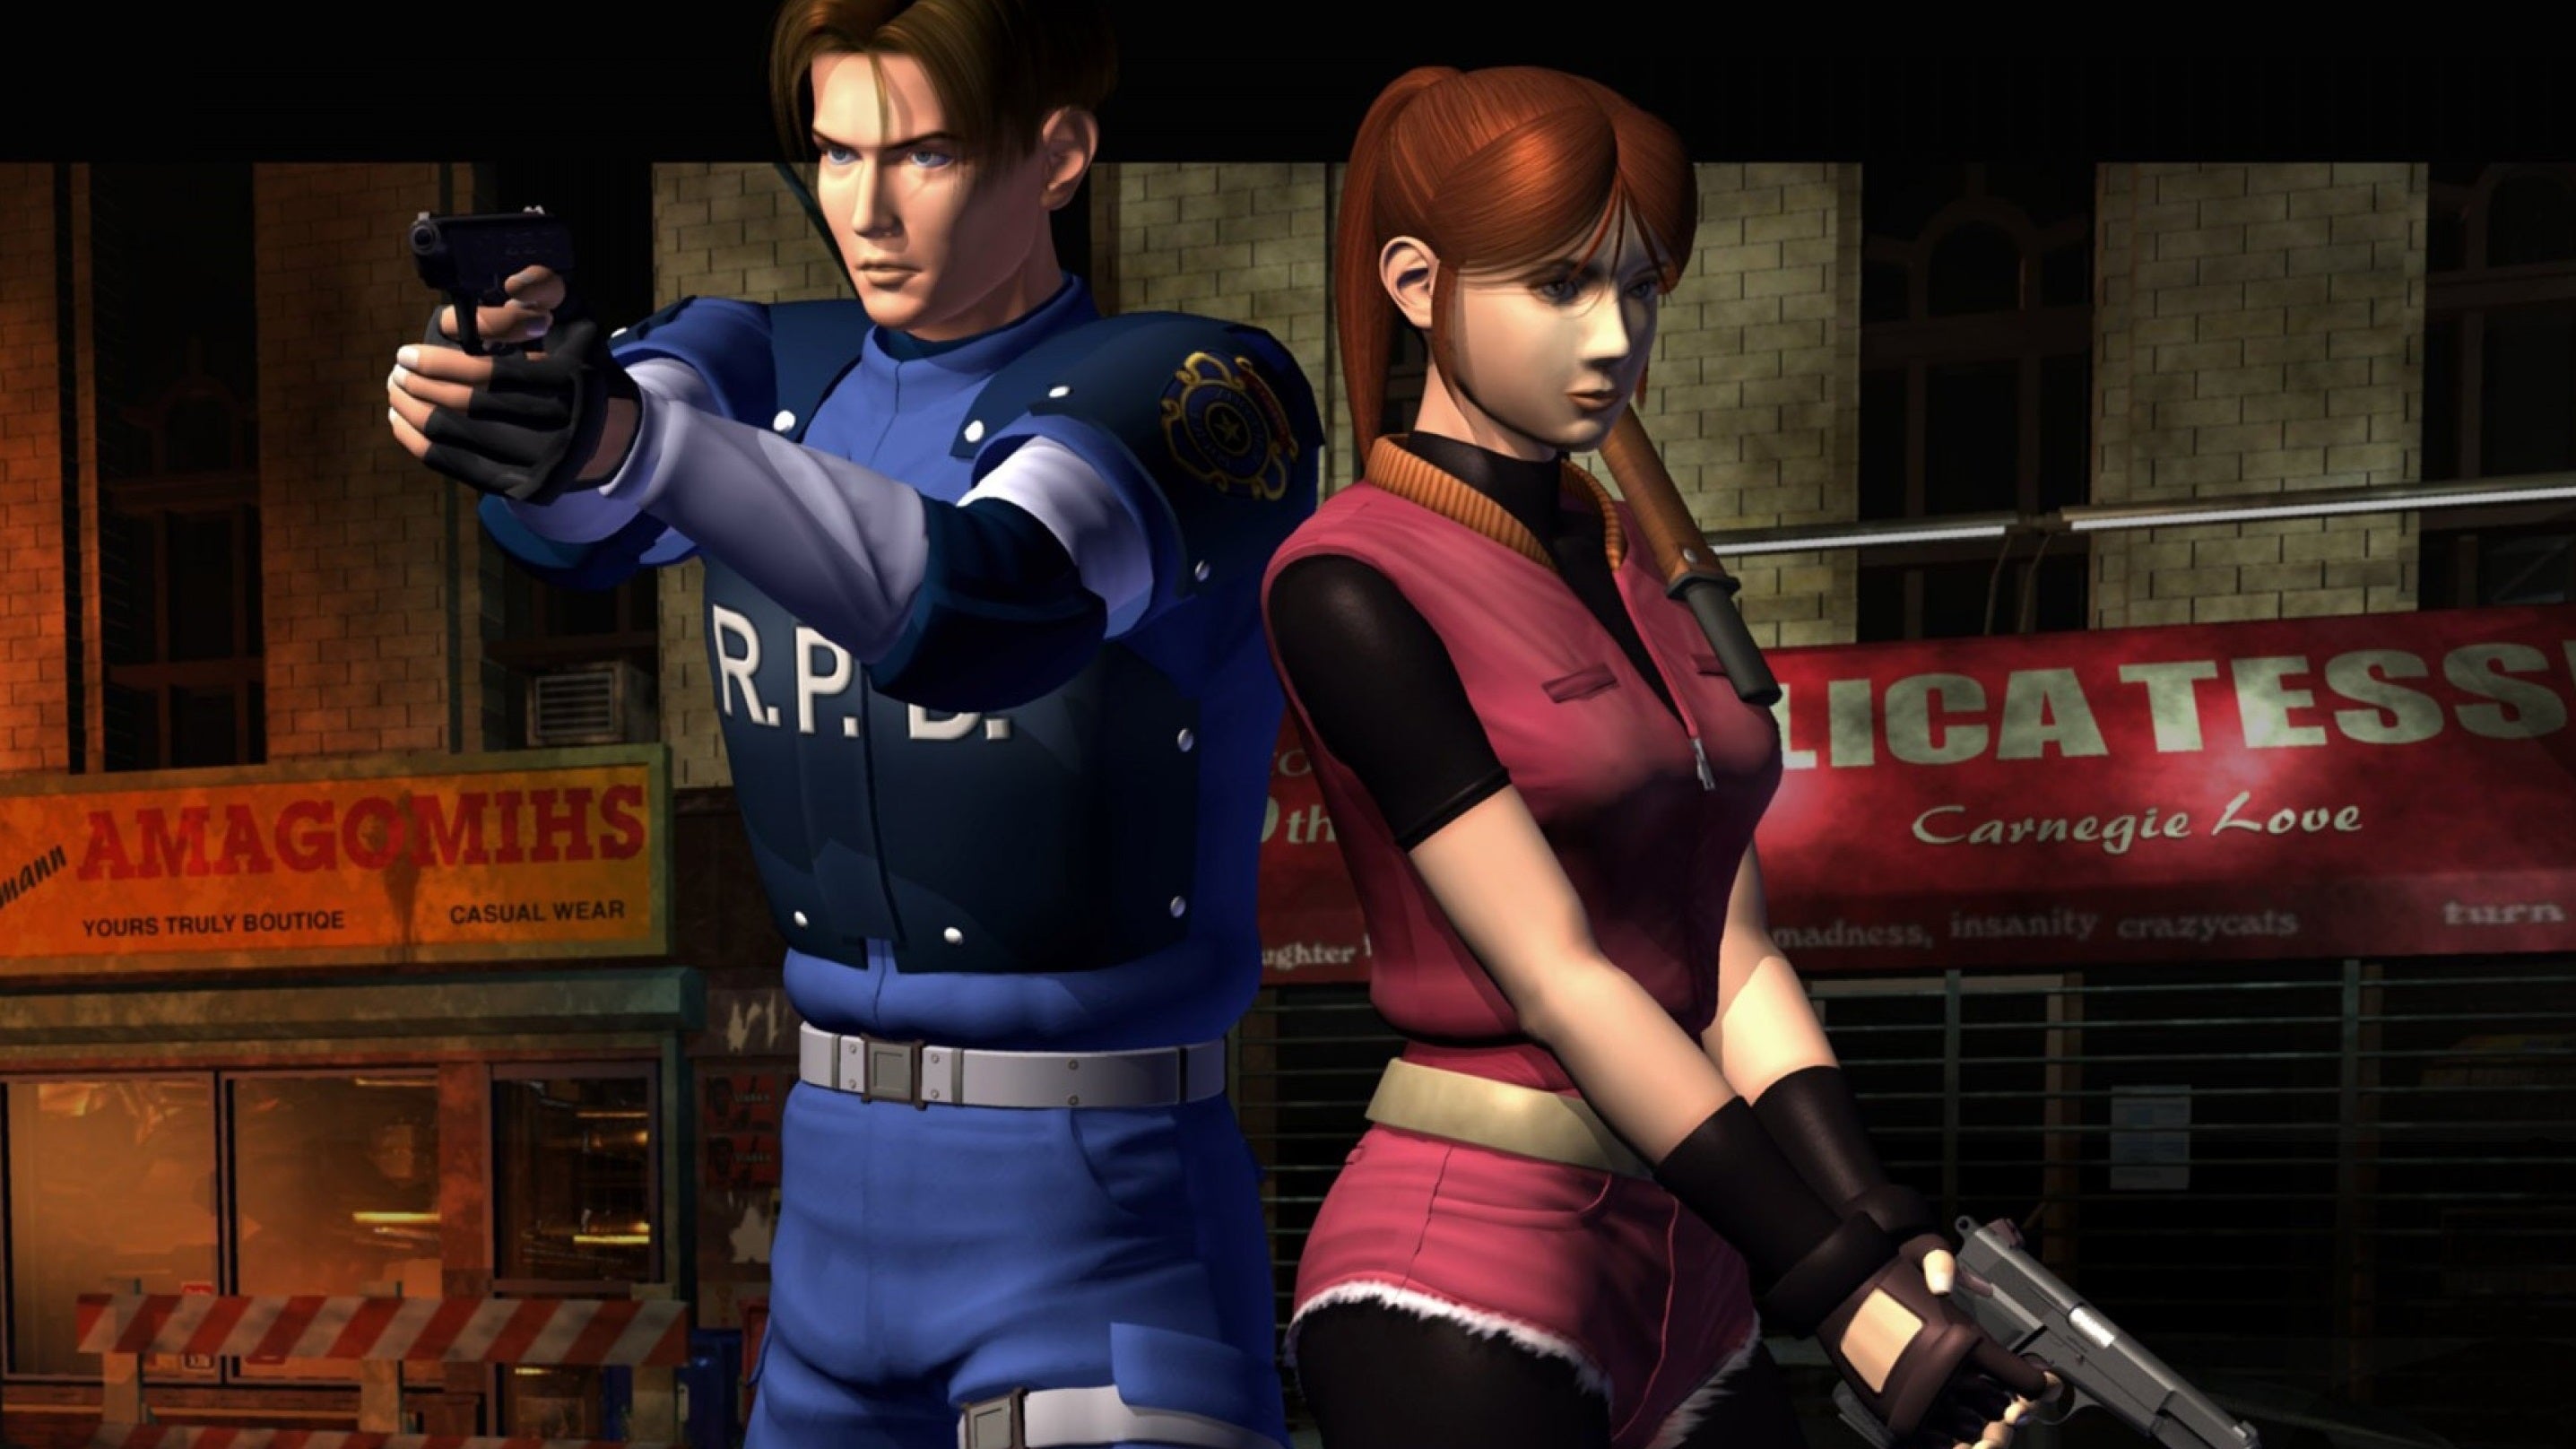 25 years on, Resident Evil 2 still feels relevant - personally and